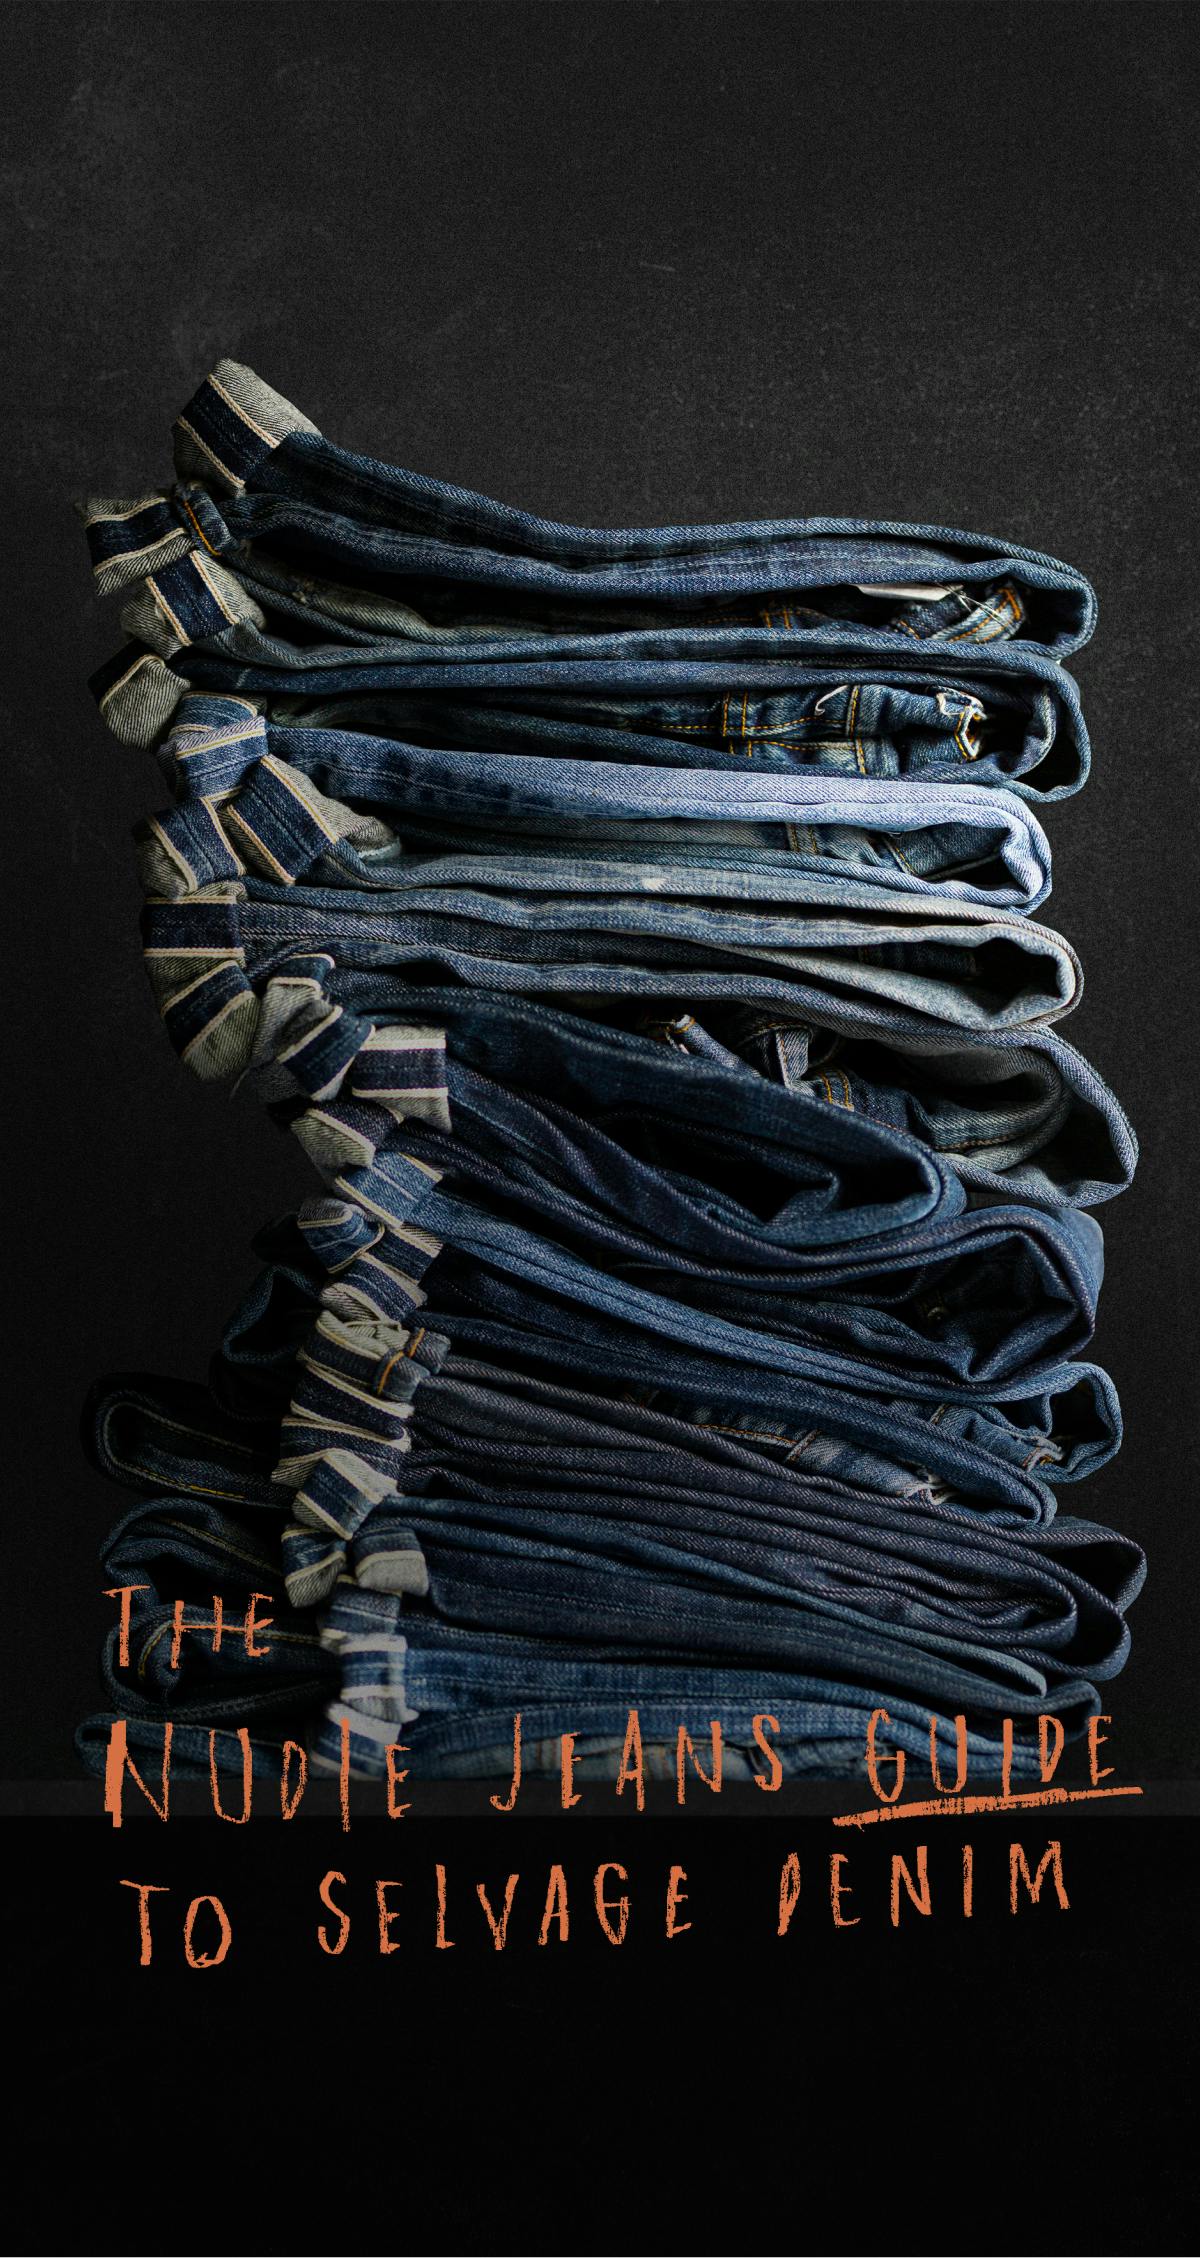 The Nudie Jeans Guide  to Selvage Denim.